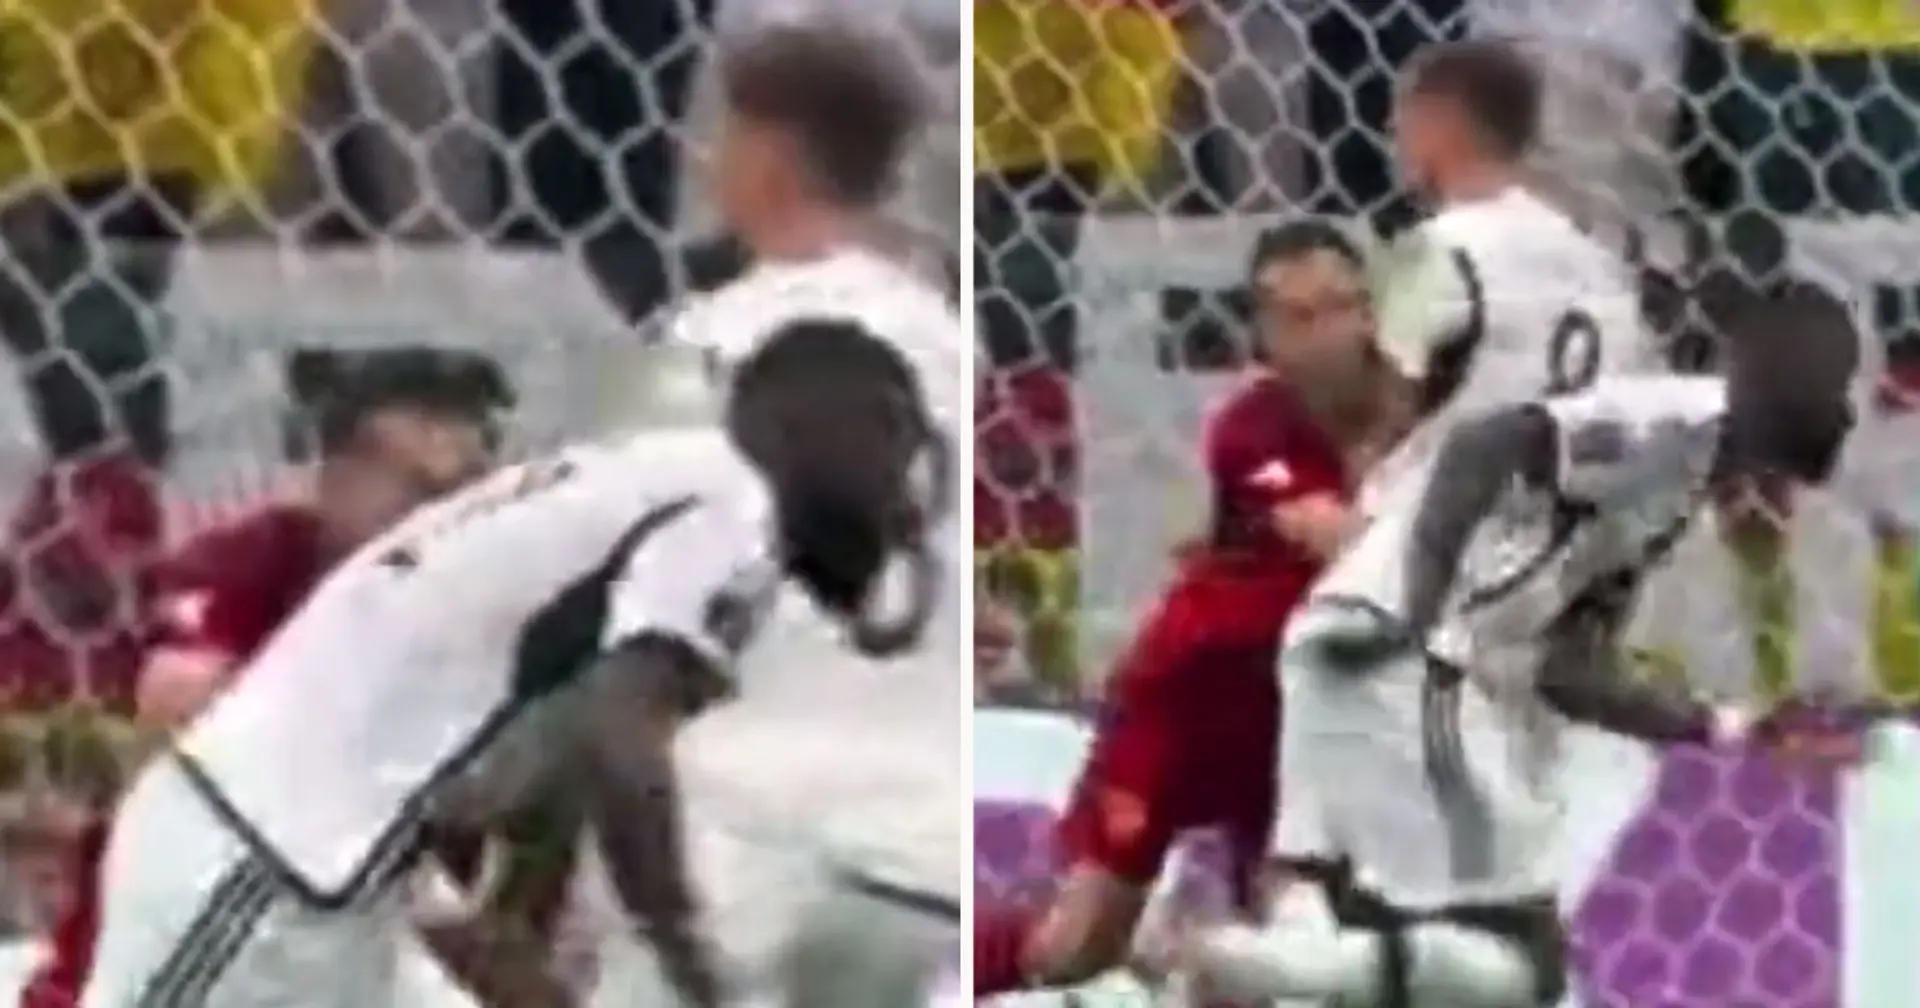 54c02977 7ed1 4f6c b282 b1e3e7eae2c0?width=1920&quality=75 Spotted: Busquets gets tricked by Rudiger before barging into Leon Goretzka in Germany clash